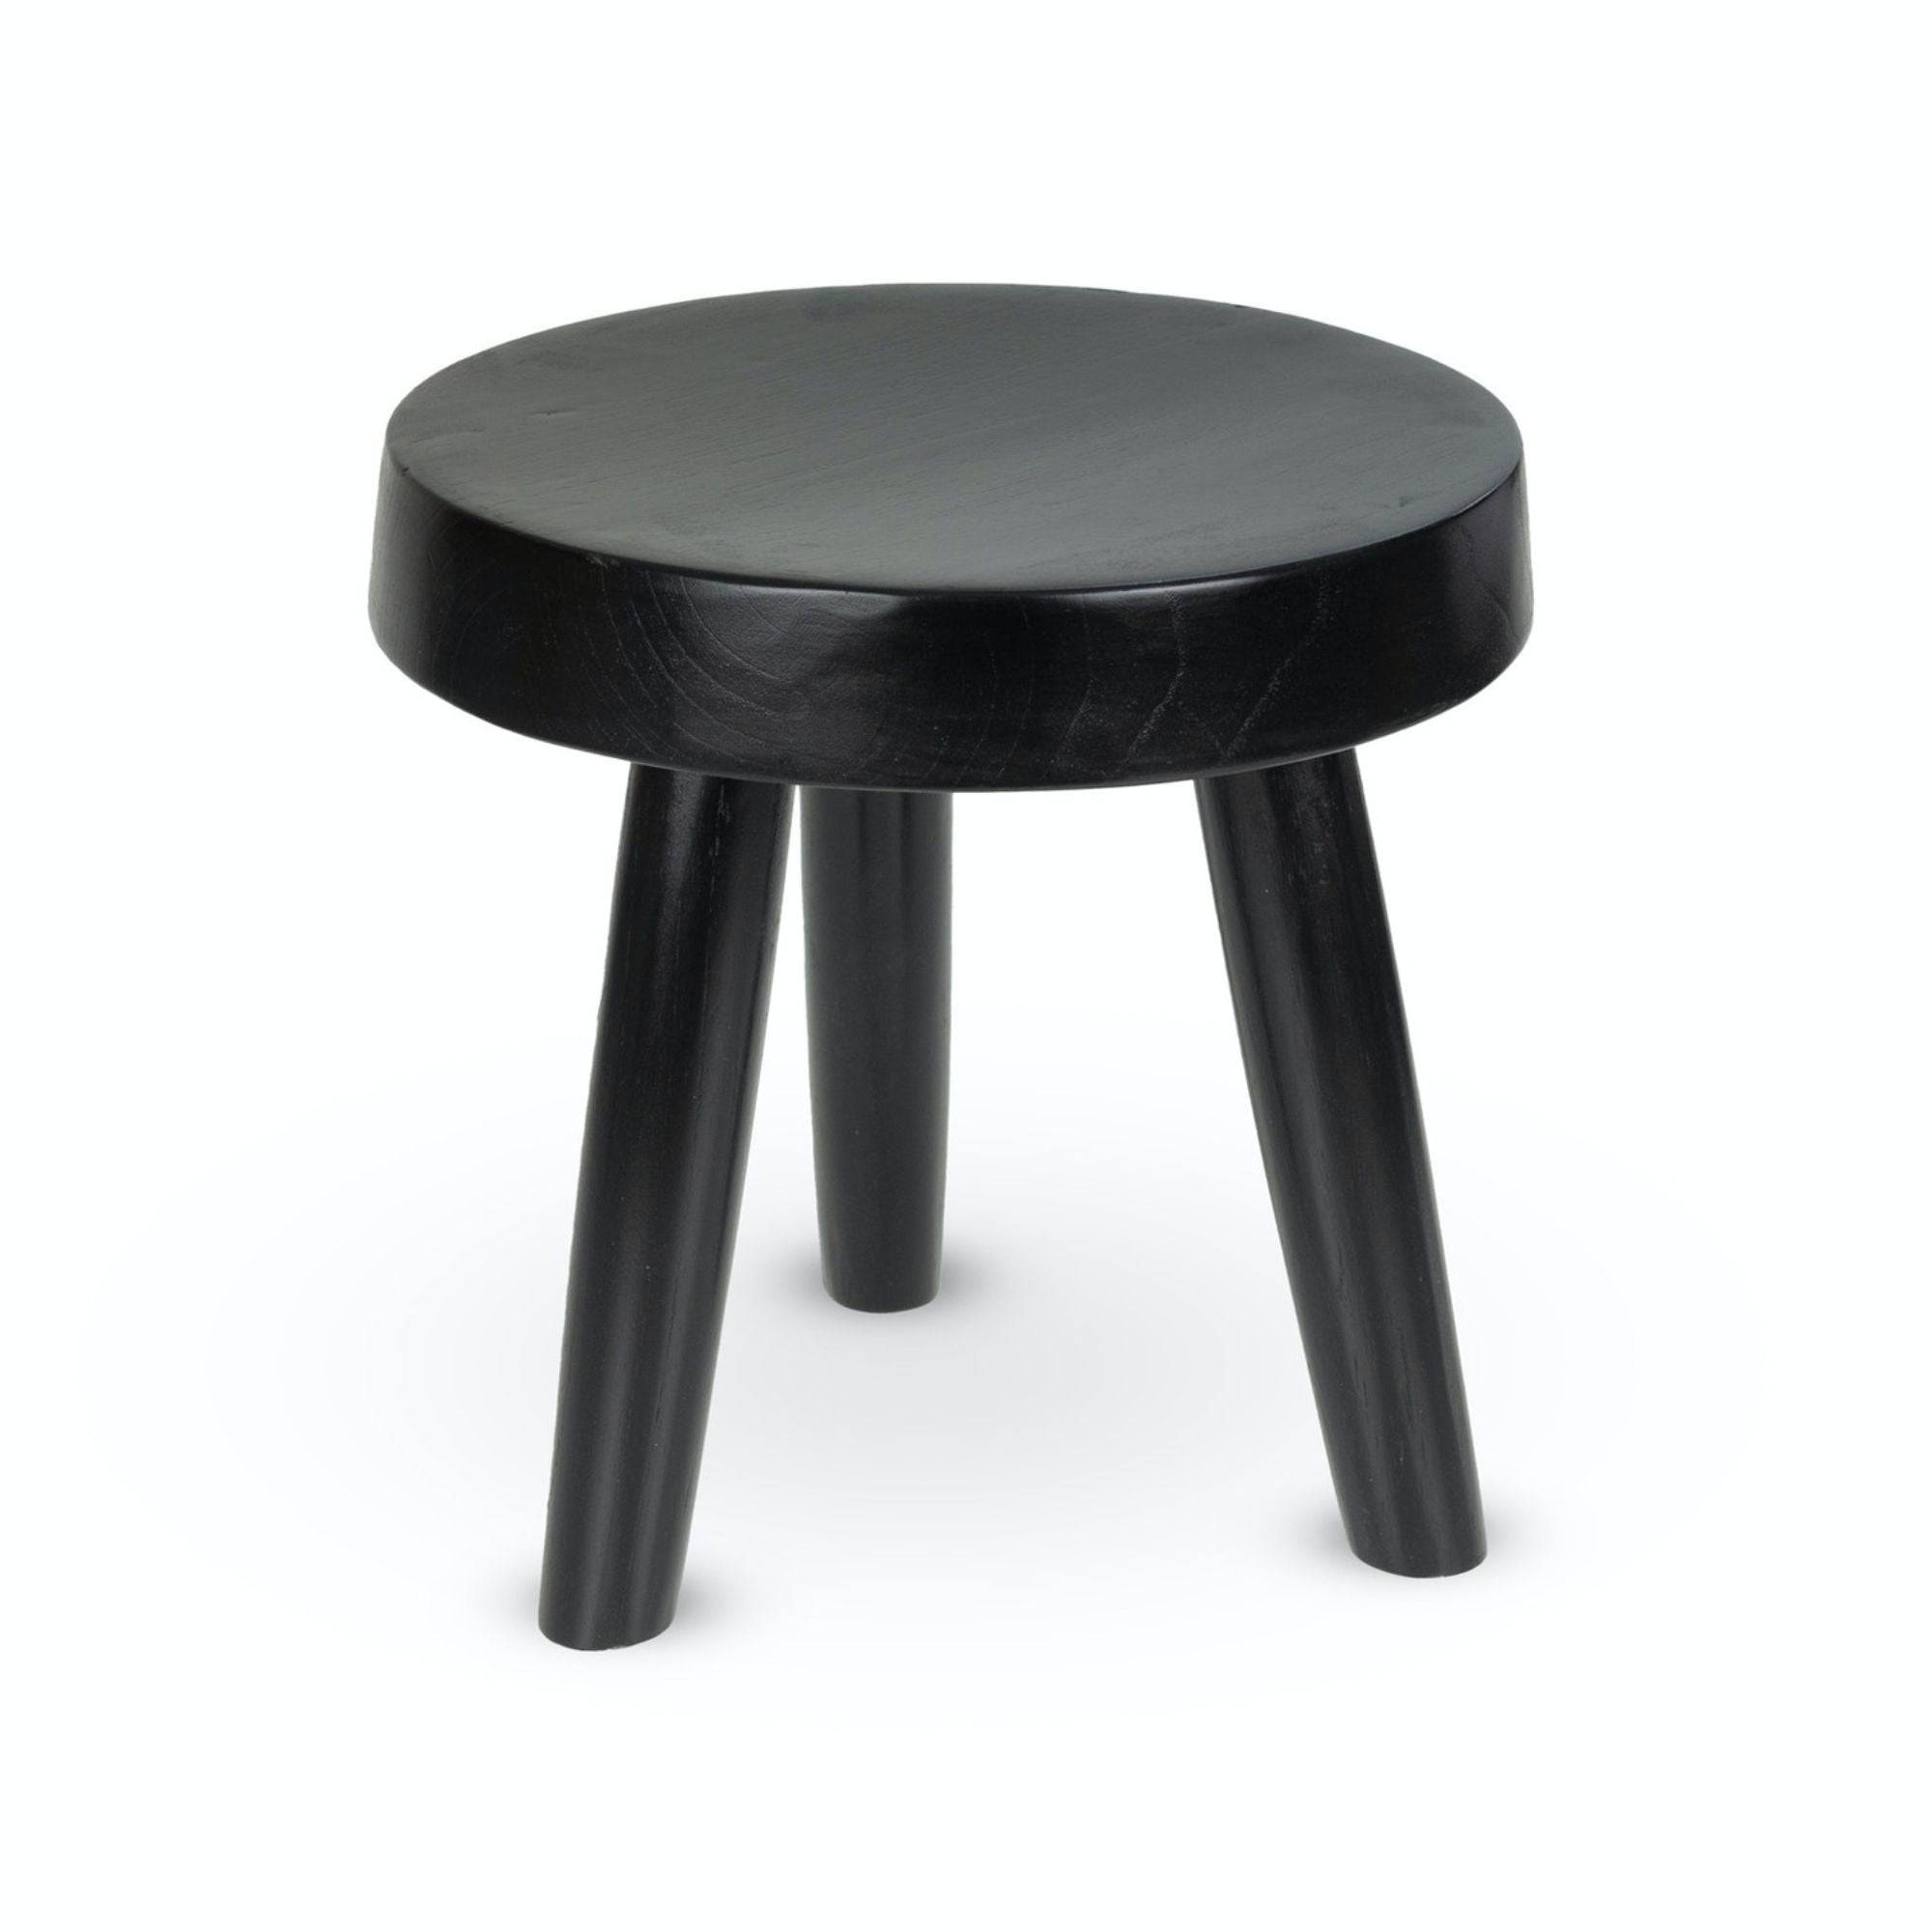 Charles Stool M - THAT COOL LIVING